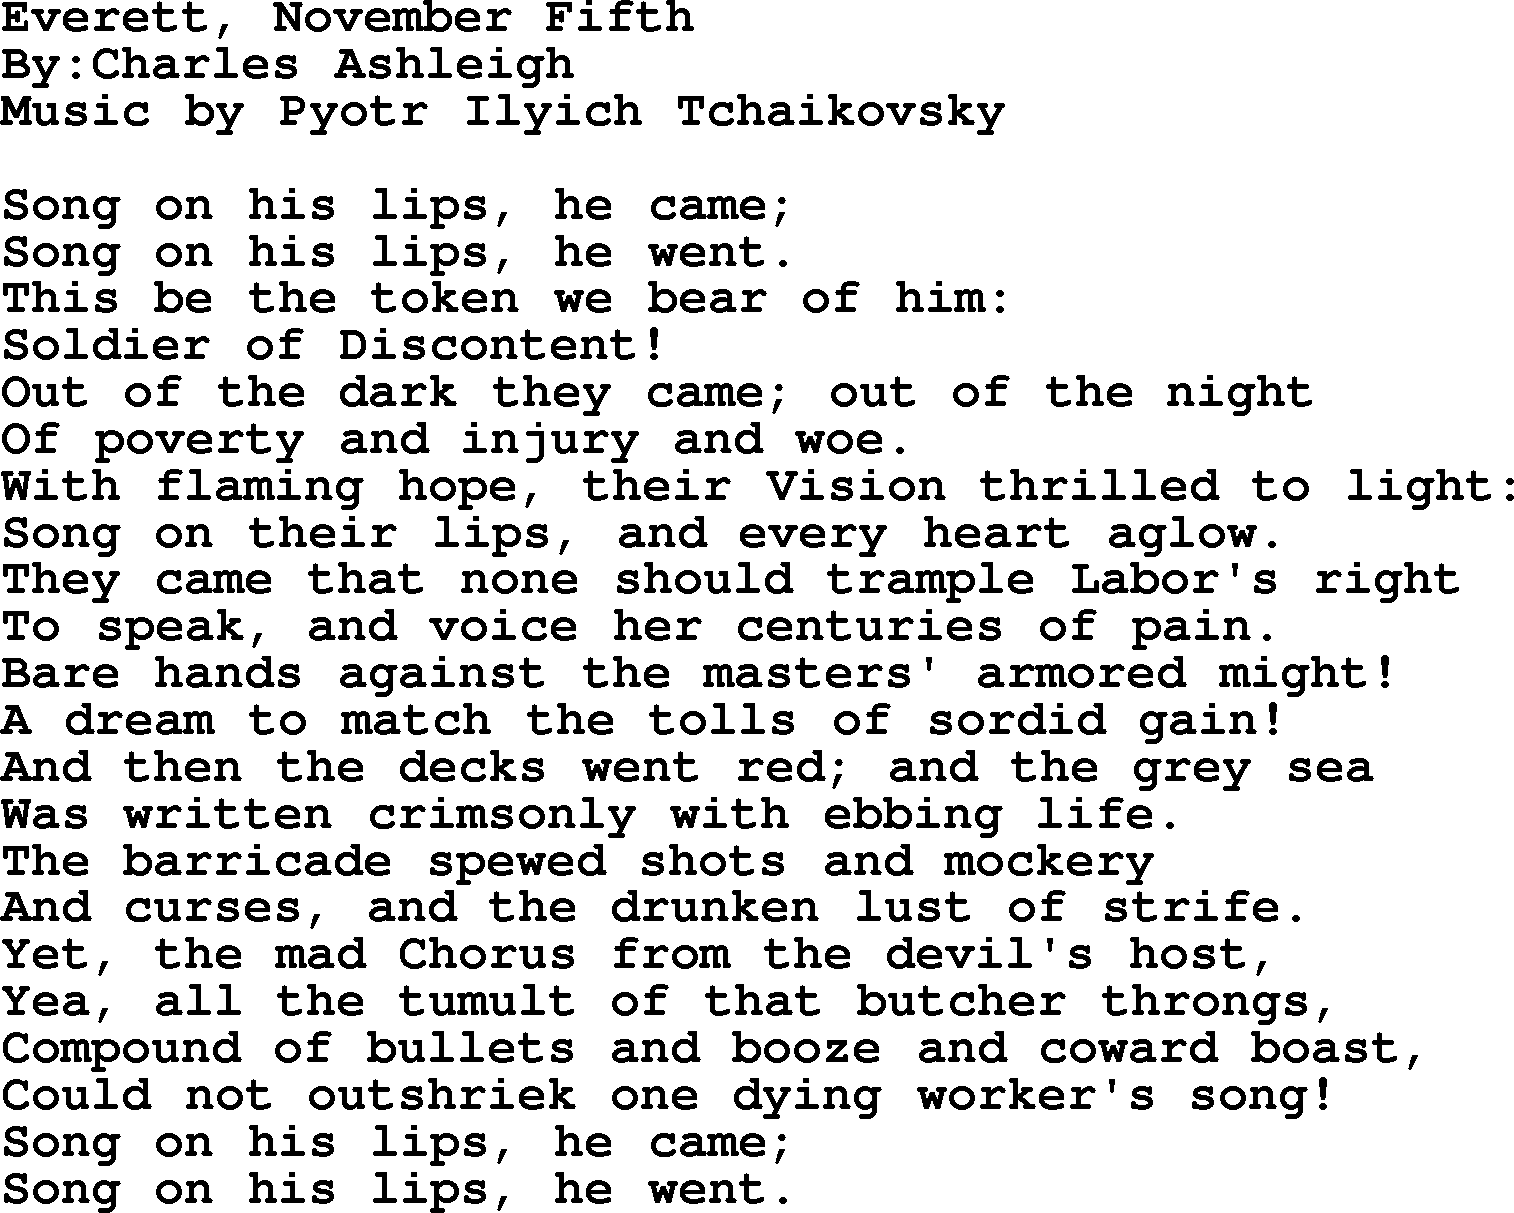 Political, Solidarity, Workers or Union song: Everett November Fifth, lyrics